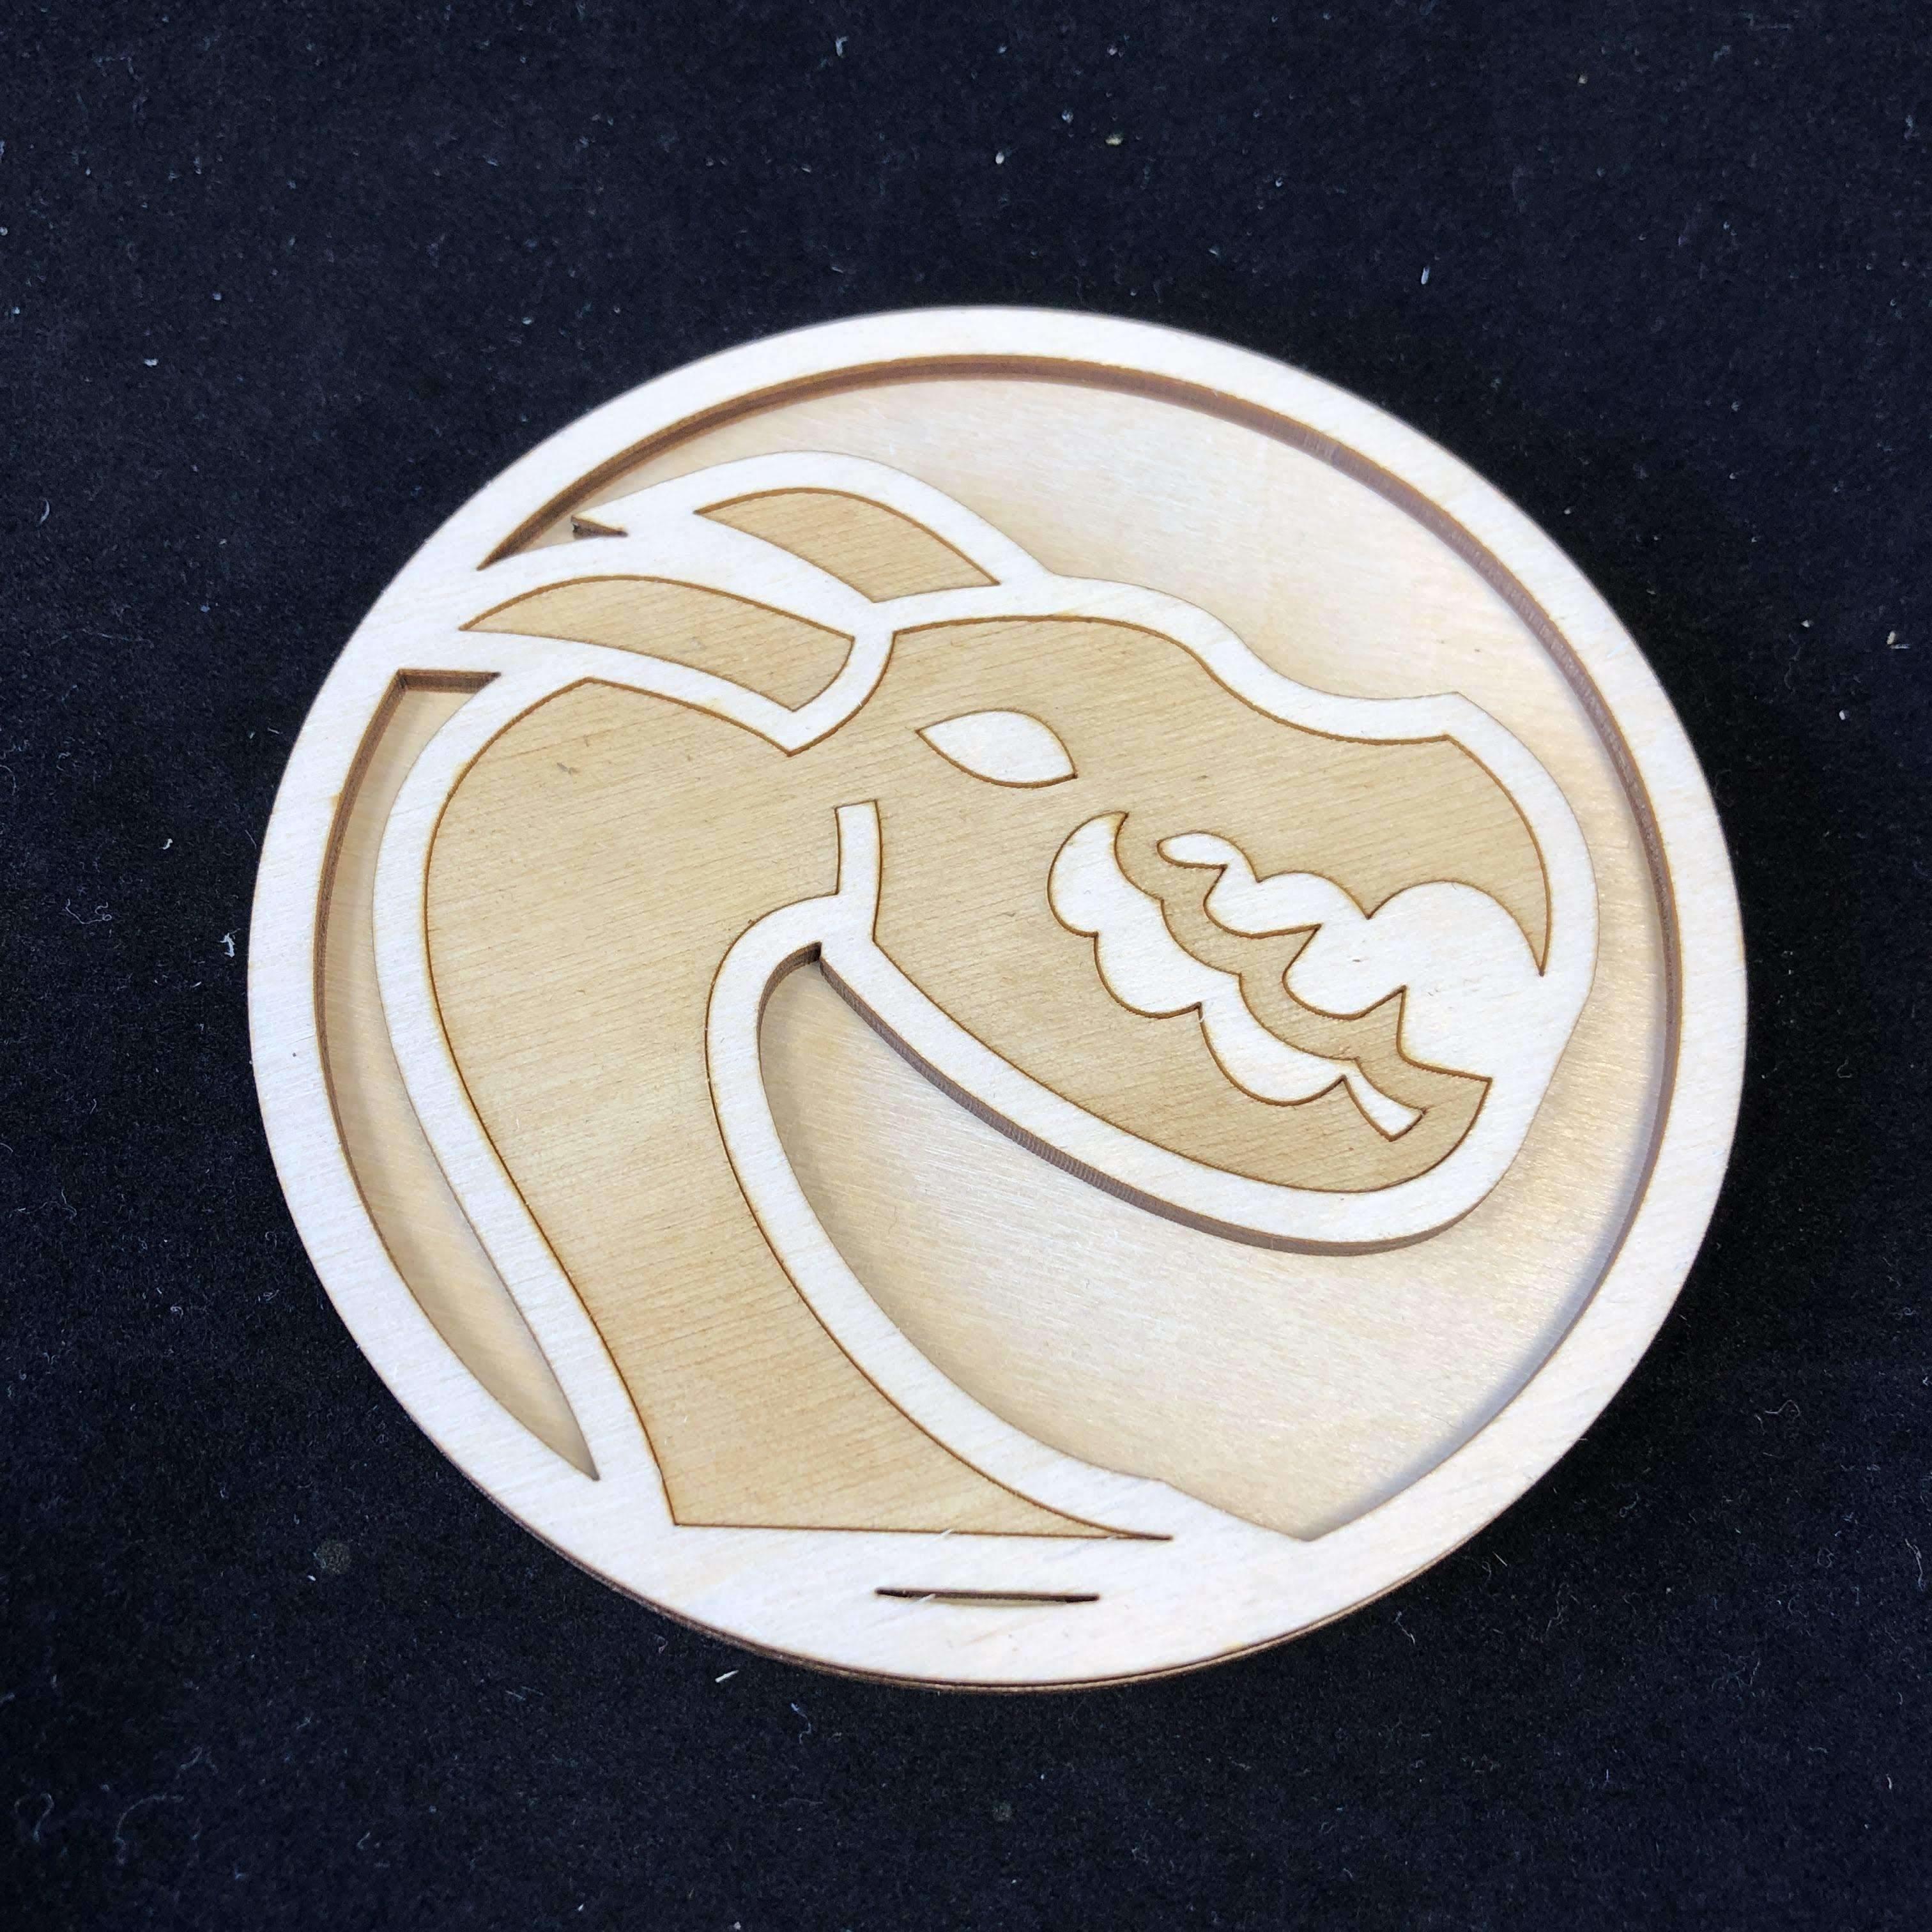 Red Berry Crafts Ltd:Deluxe 4 Inch Ancient Dragon 2 Gaming Tokens